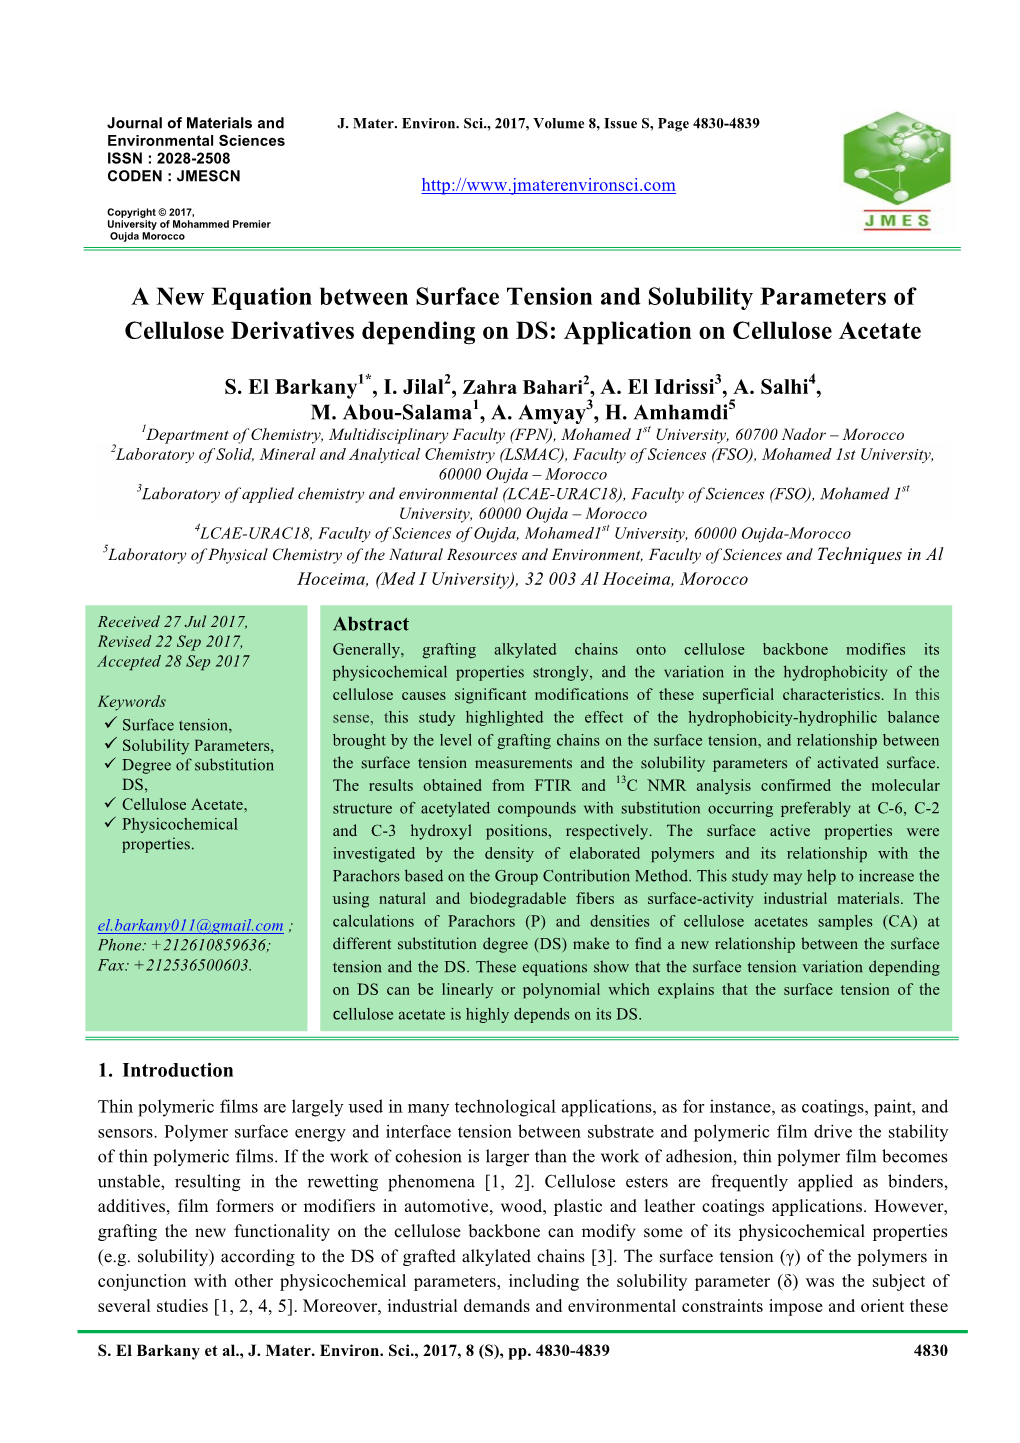 A New Equation Between Surface Tension and Solubility Parameters of Cellulose Derivatives Depending on DS: Application on Cellulose Acetate